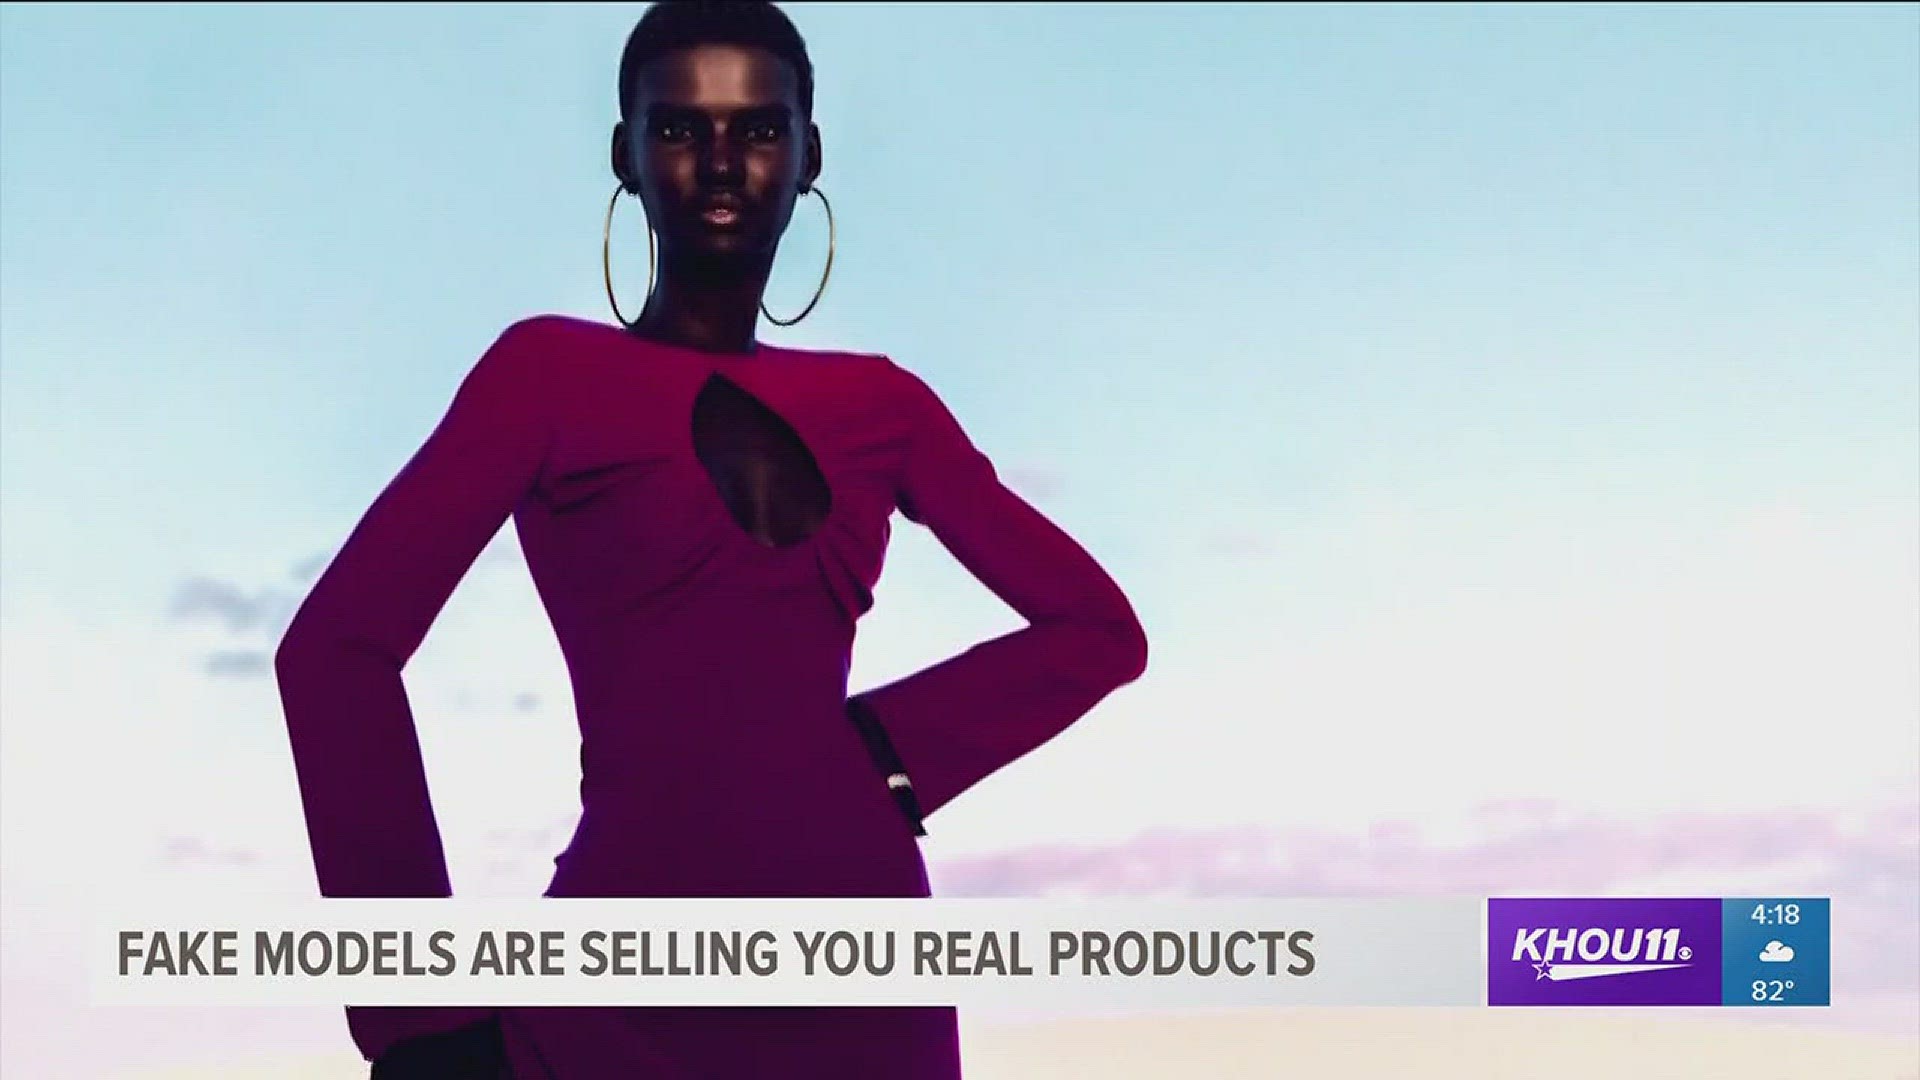 CGI and 3D models are being created to promote products on social media sites.